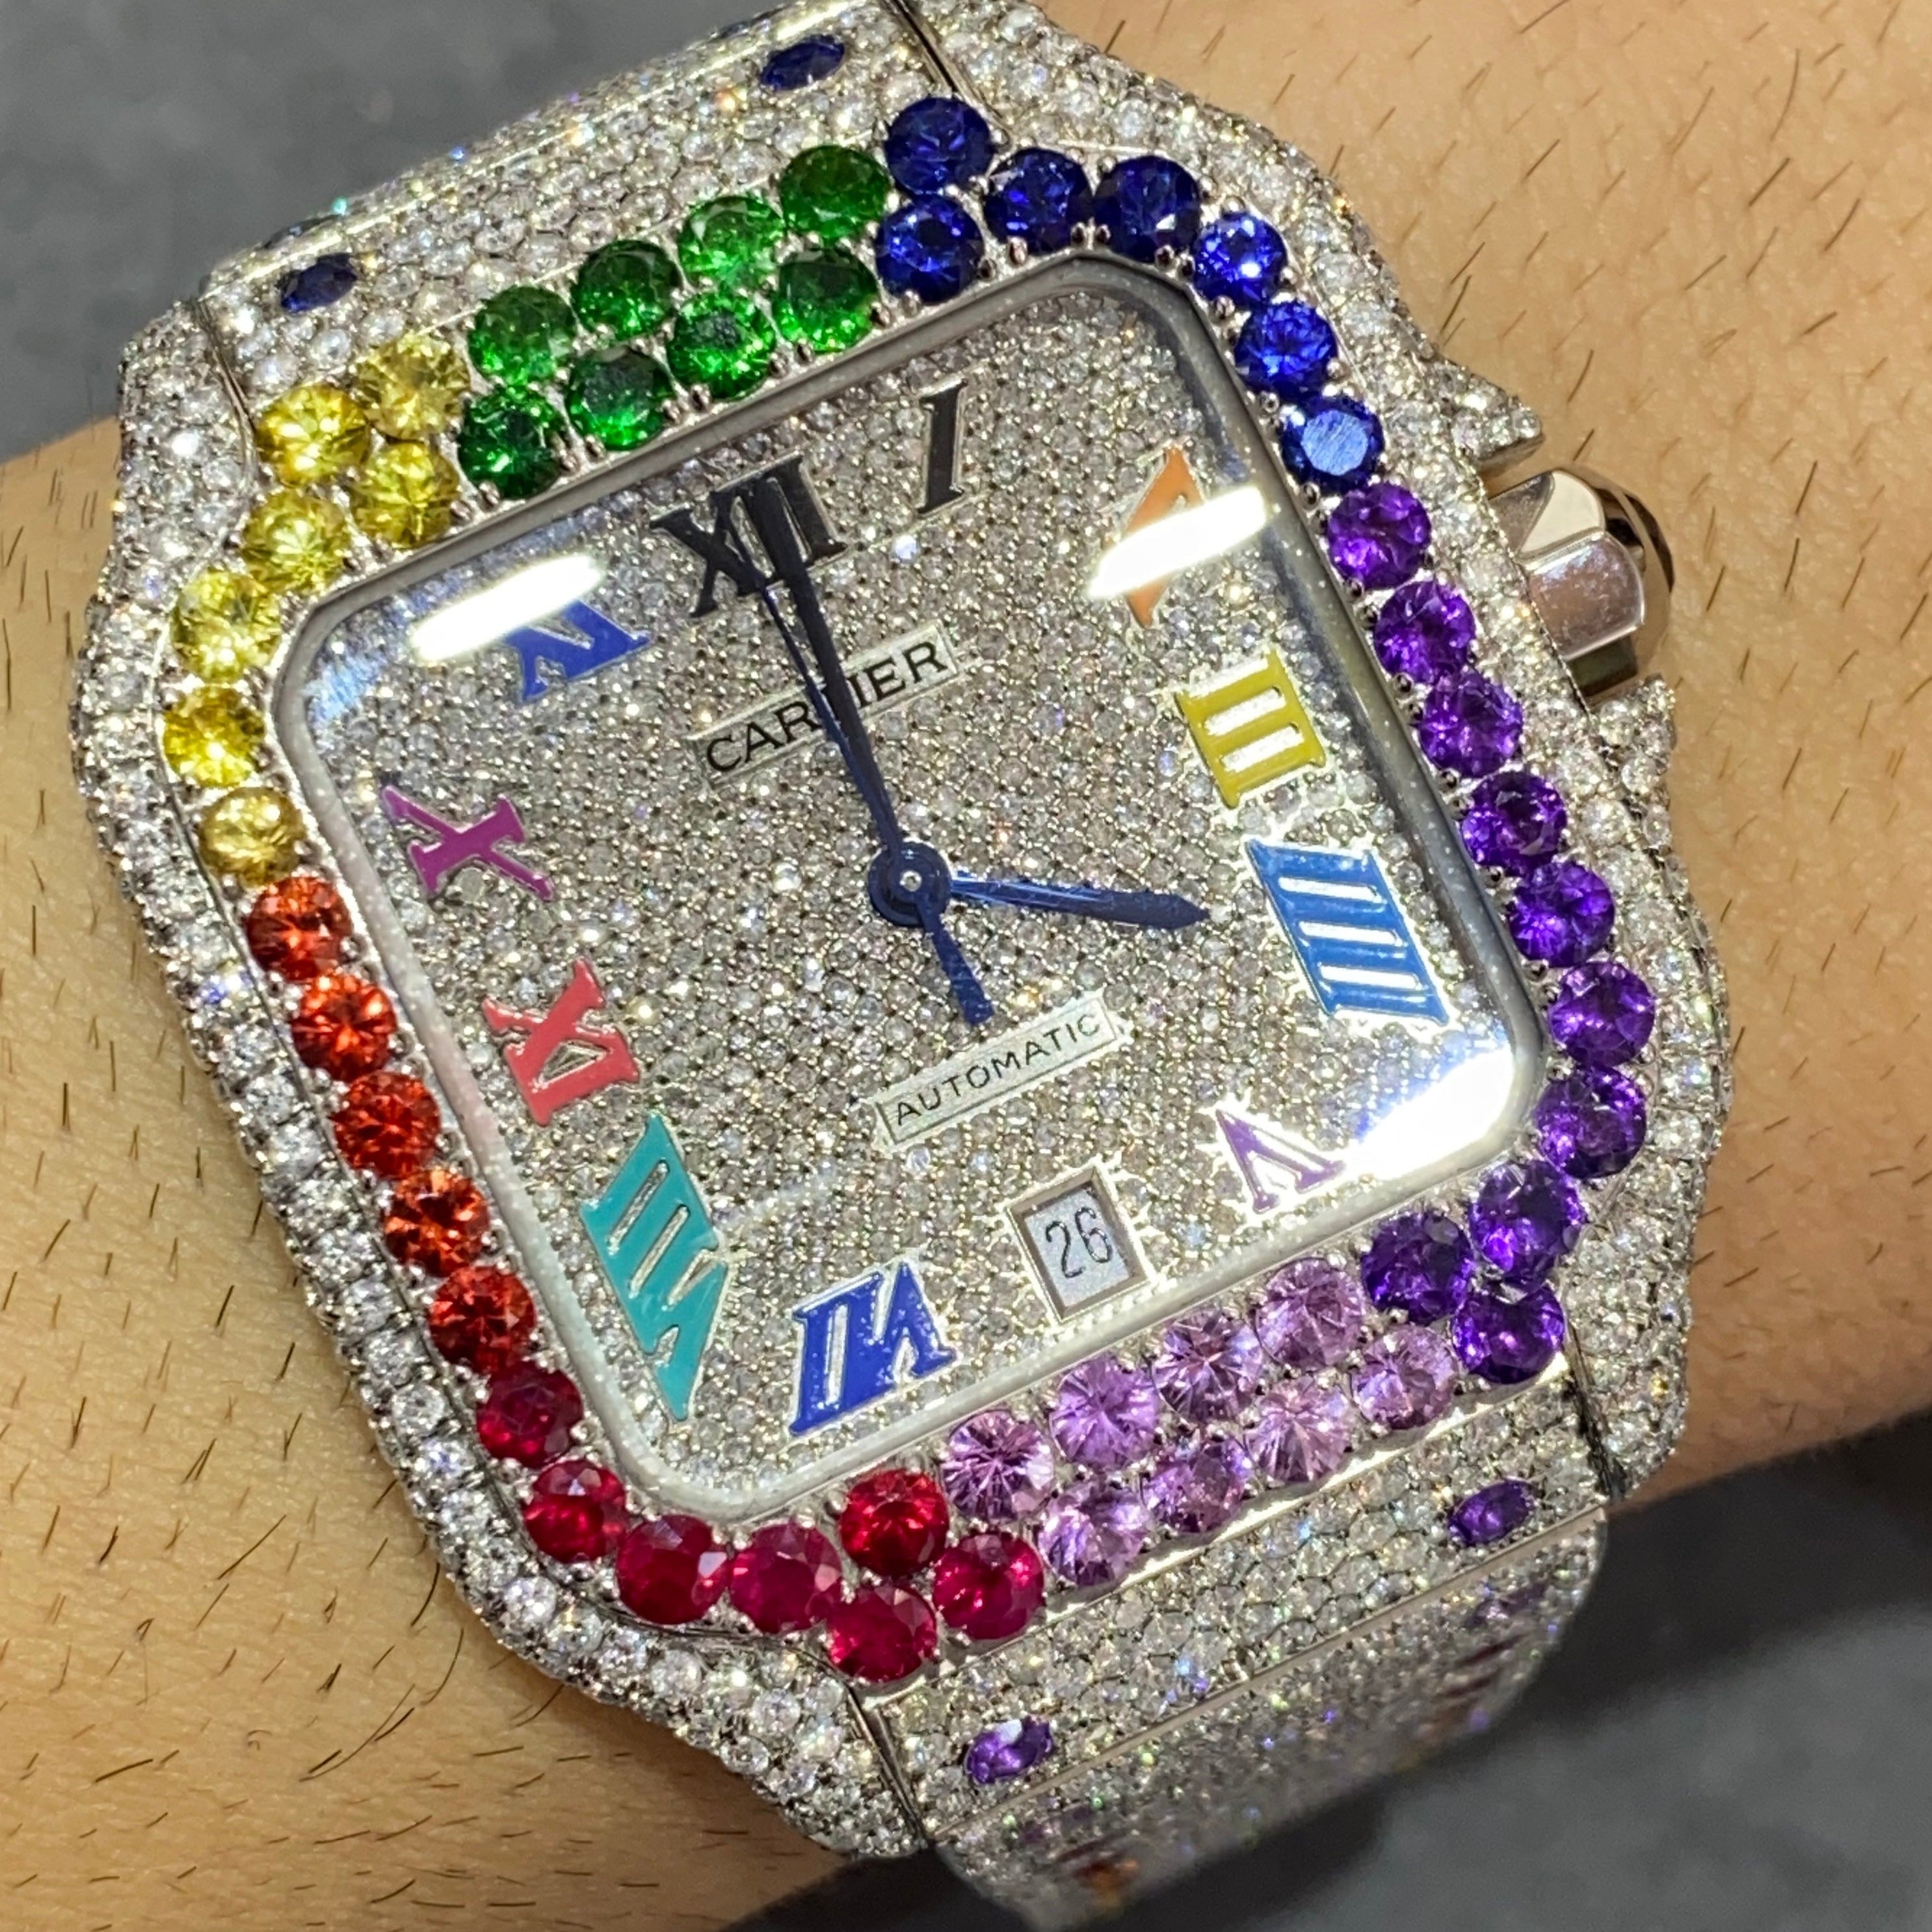 new cartier santos xl "iced bustdown"watches ! ruby,sapphire,emerald,4styles vs1 💎natural stones